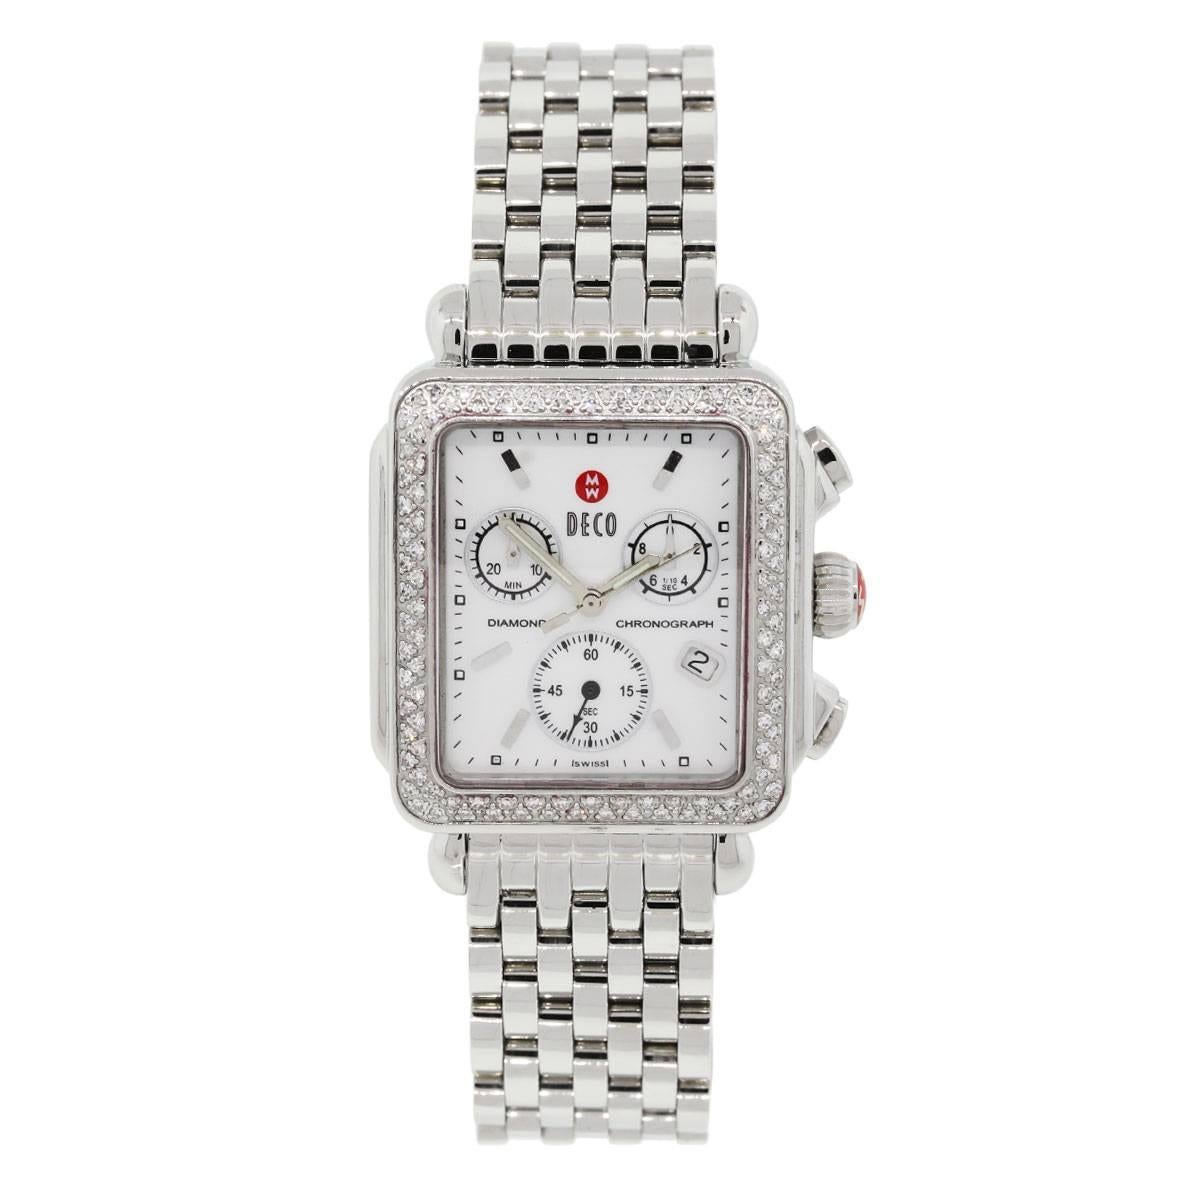 Brand: Michele
MPN: 71-6000
Model: Deco
Case Material: Stainless steel
Case Diameter: 33mm
Crystal: Scratch resistant sapphire
Bezel: Diamond bezel
Dial: Mother of pearl chronograph dial
Bracelet: Stainless steel
Size: Will fit a 7.5″ wrist
Clasp: